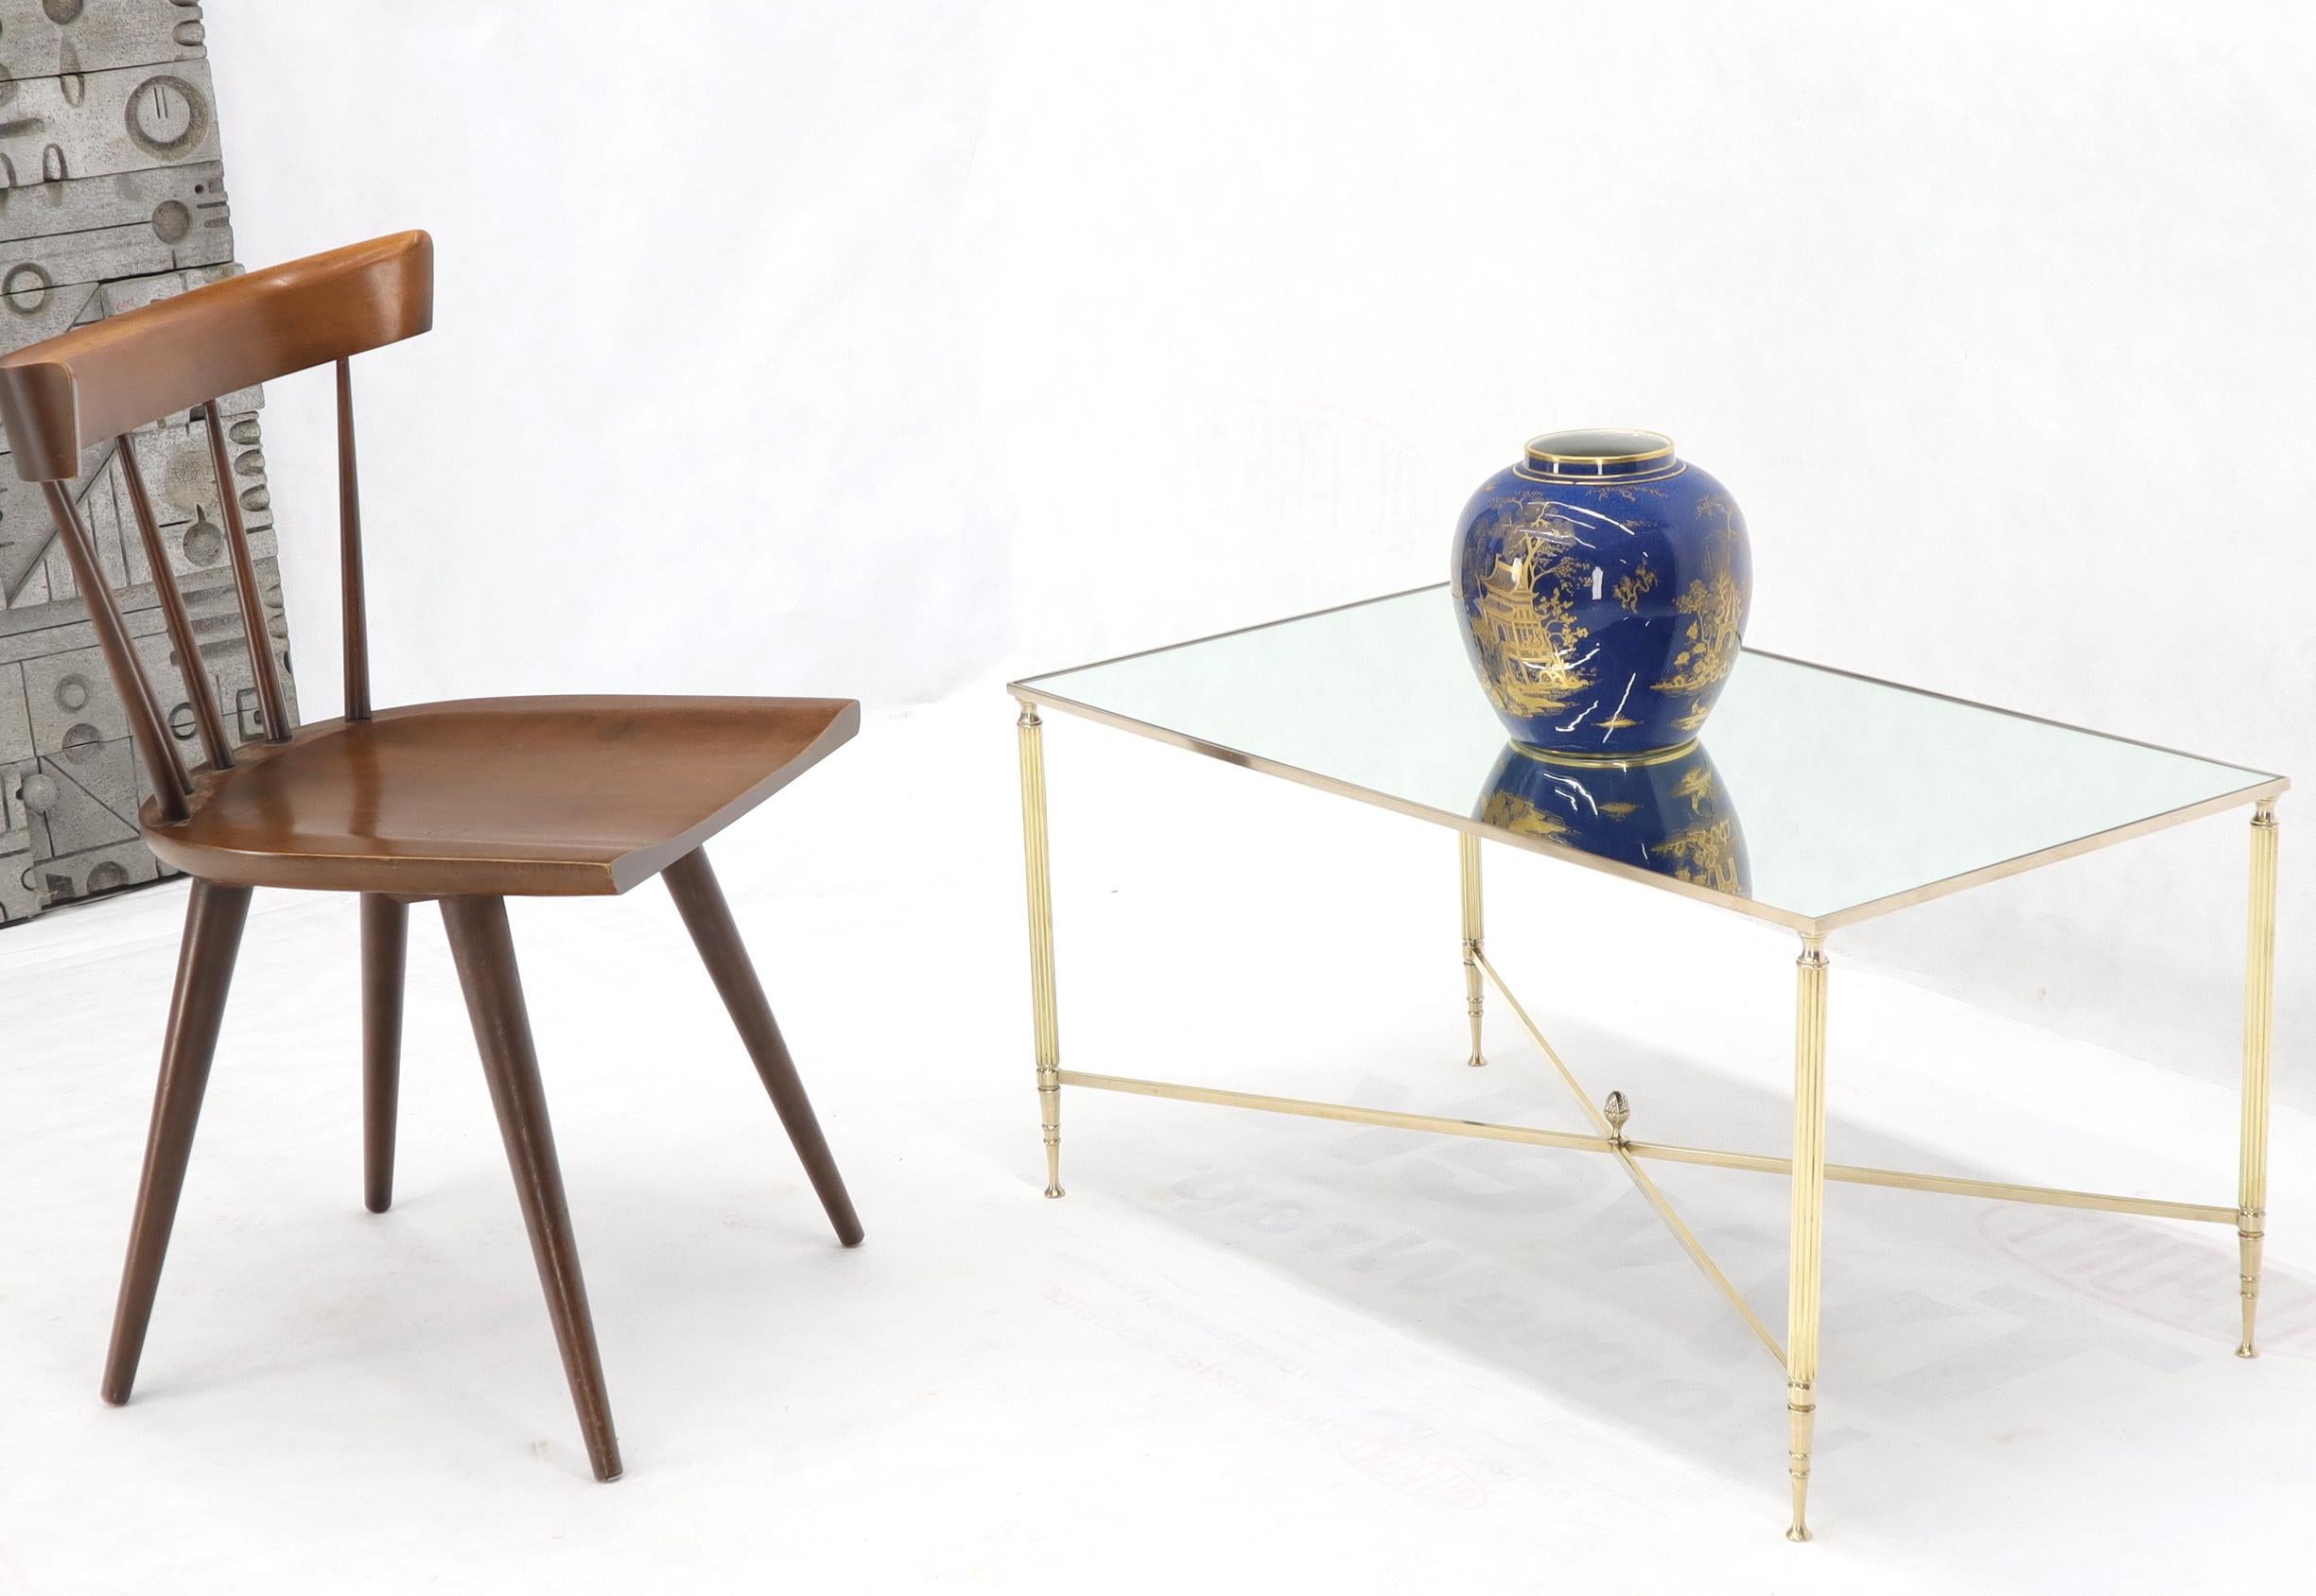 Midcentury Italian modern brass and mirrored glass top compact petit coffee table. Solid brass pineapple finial in the center of X-shape stretcher.